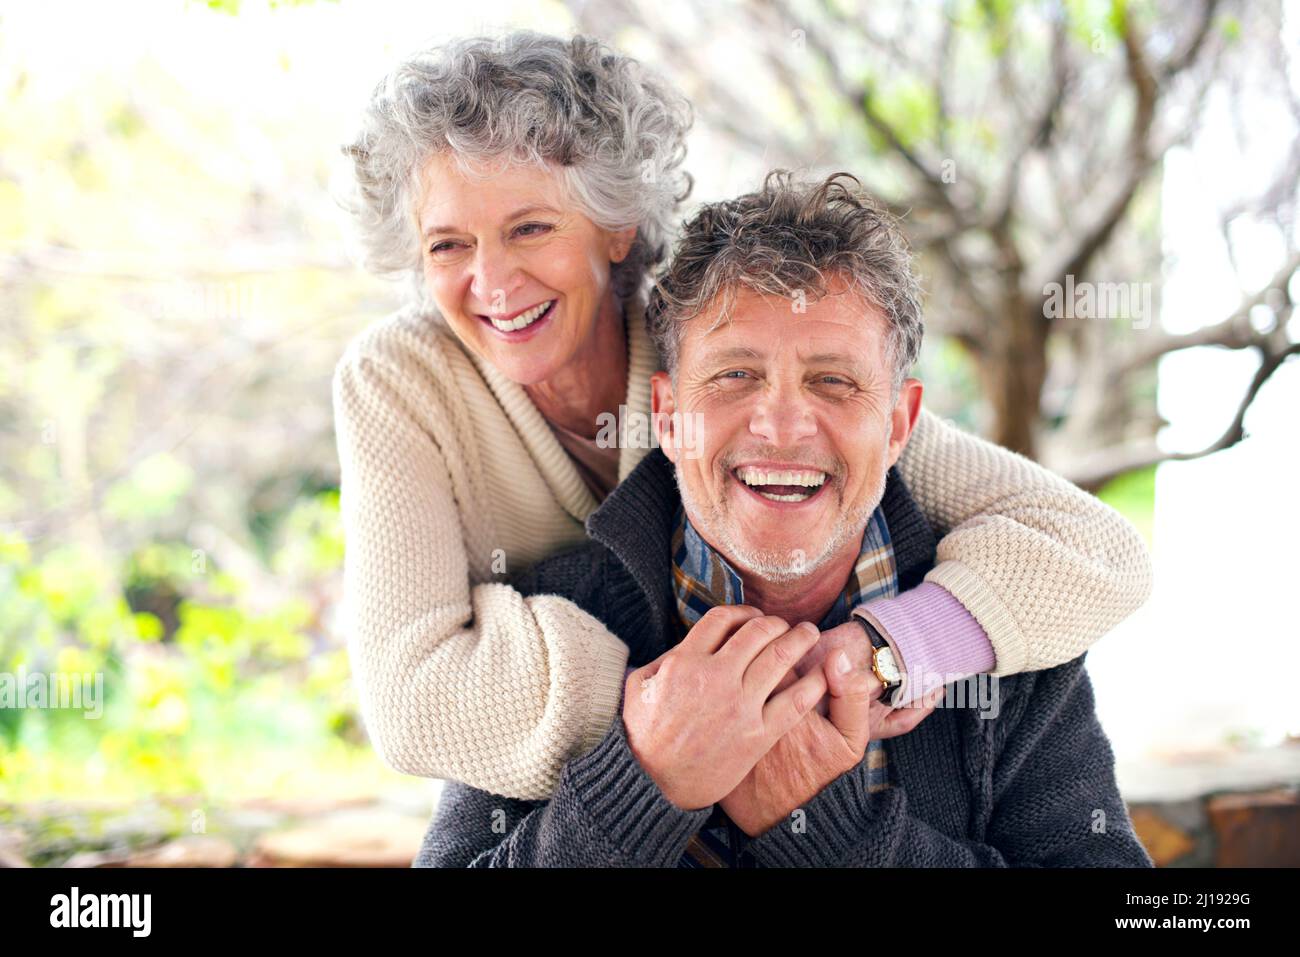 Lovely light-hearted moments together. Portrait of a happily married senior couple bonding outside. Stock Photo